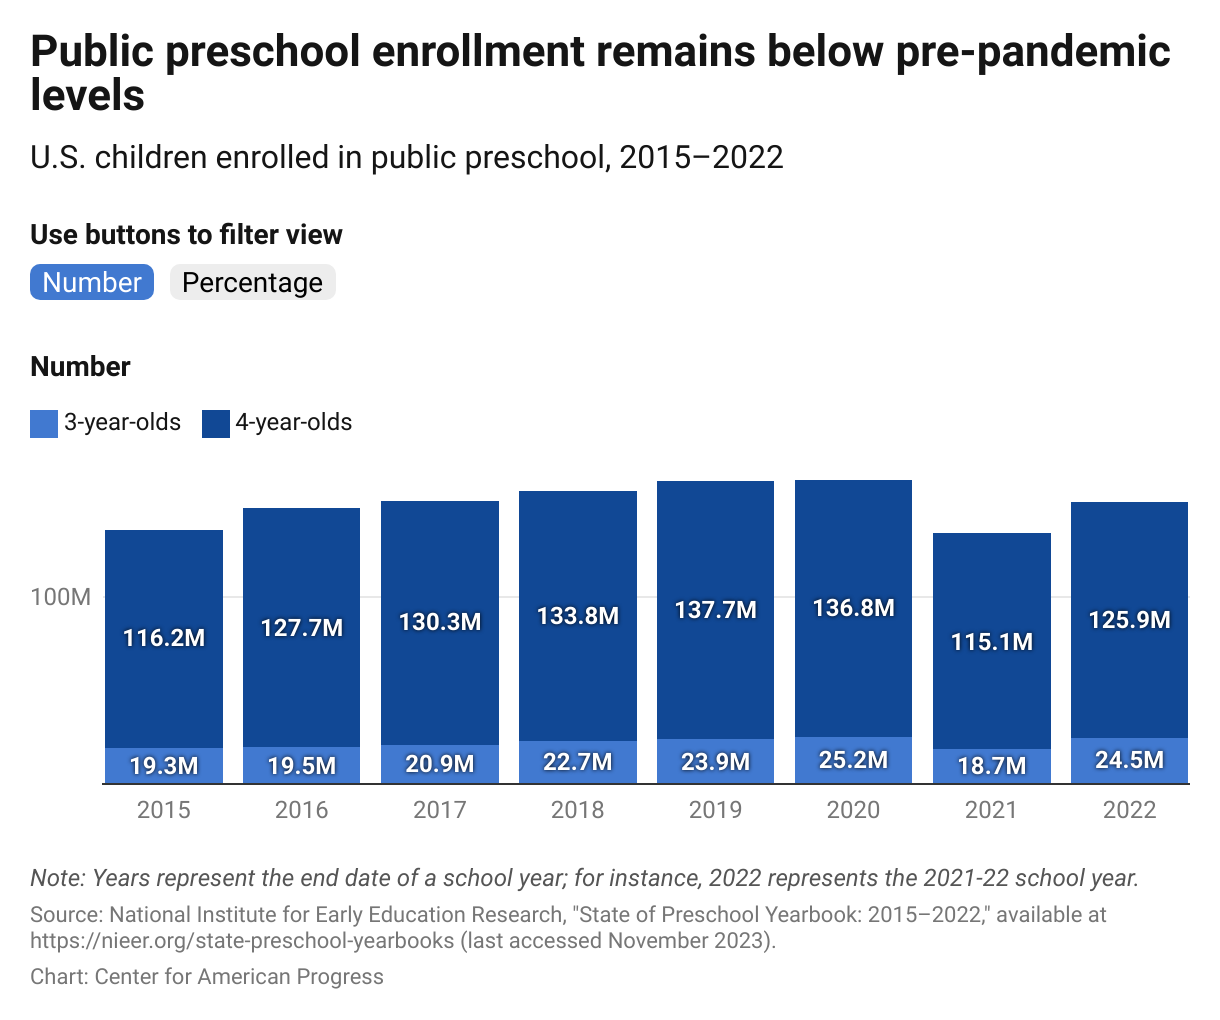 Chart showing that public preschool enrollment was significantly higher for 4-year-olds than it was for 3-year-olds for all years from 2015 to 2020;. Eenrollment for 4-year-olds experienced a decline in the 2020-21 school year and remained below pre-pandemic levels in 2022.